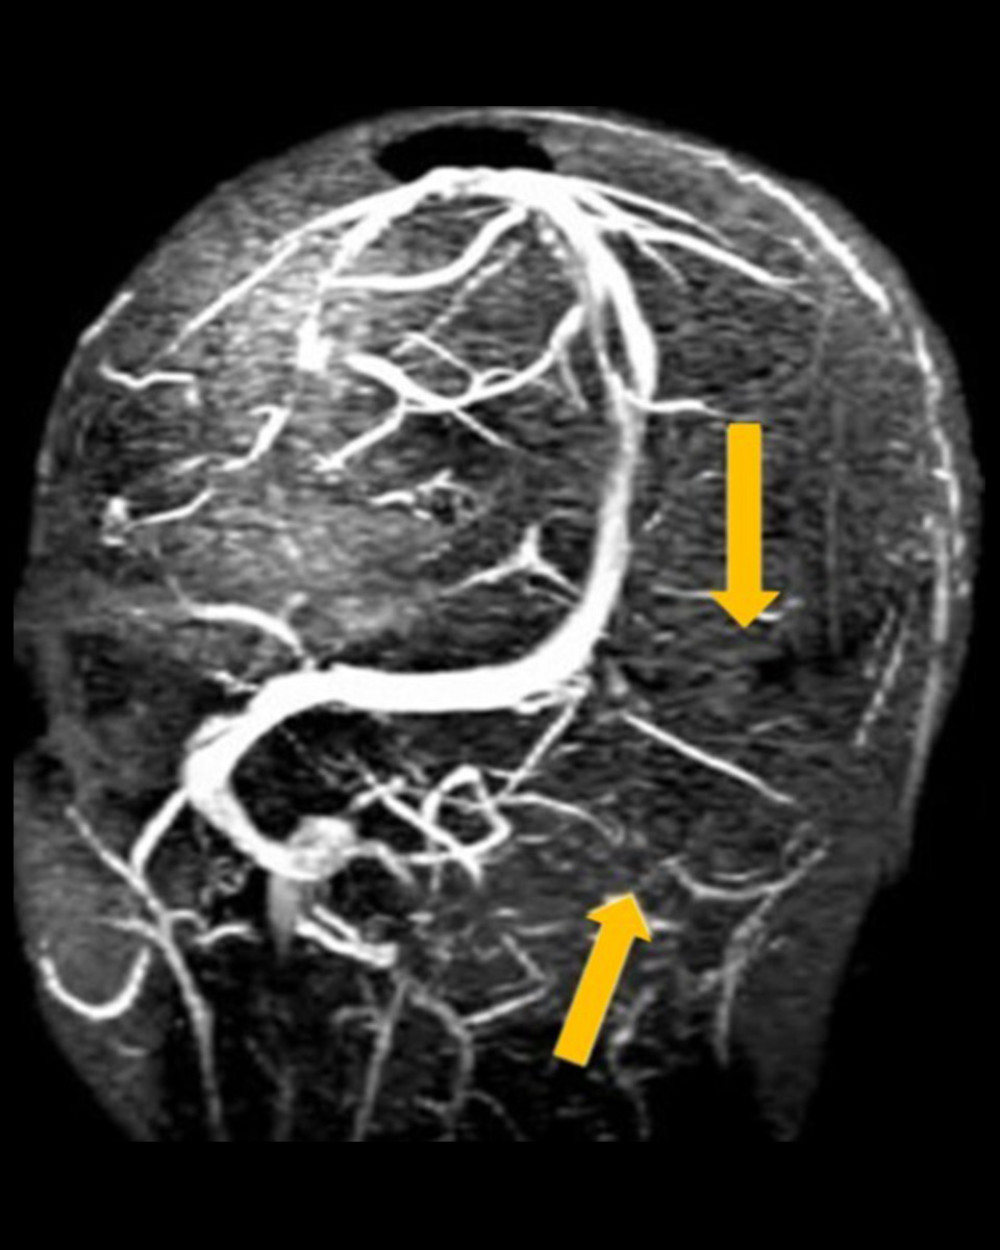 Magnetic resonance venography of the brain on admission revealed acute venous thrombosis involving the left transverse and sigmoid sinuses and left proximal jugular bulb.